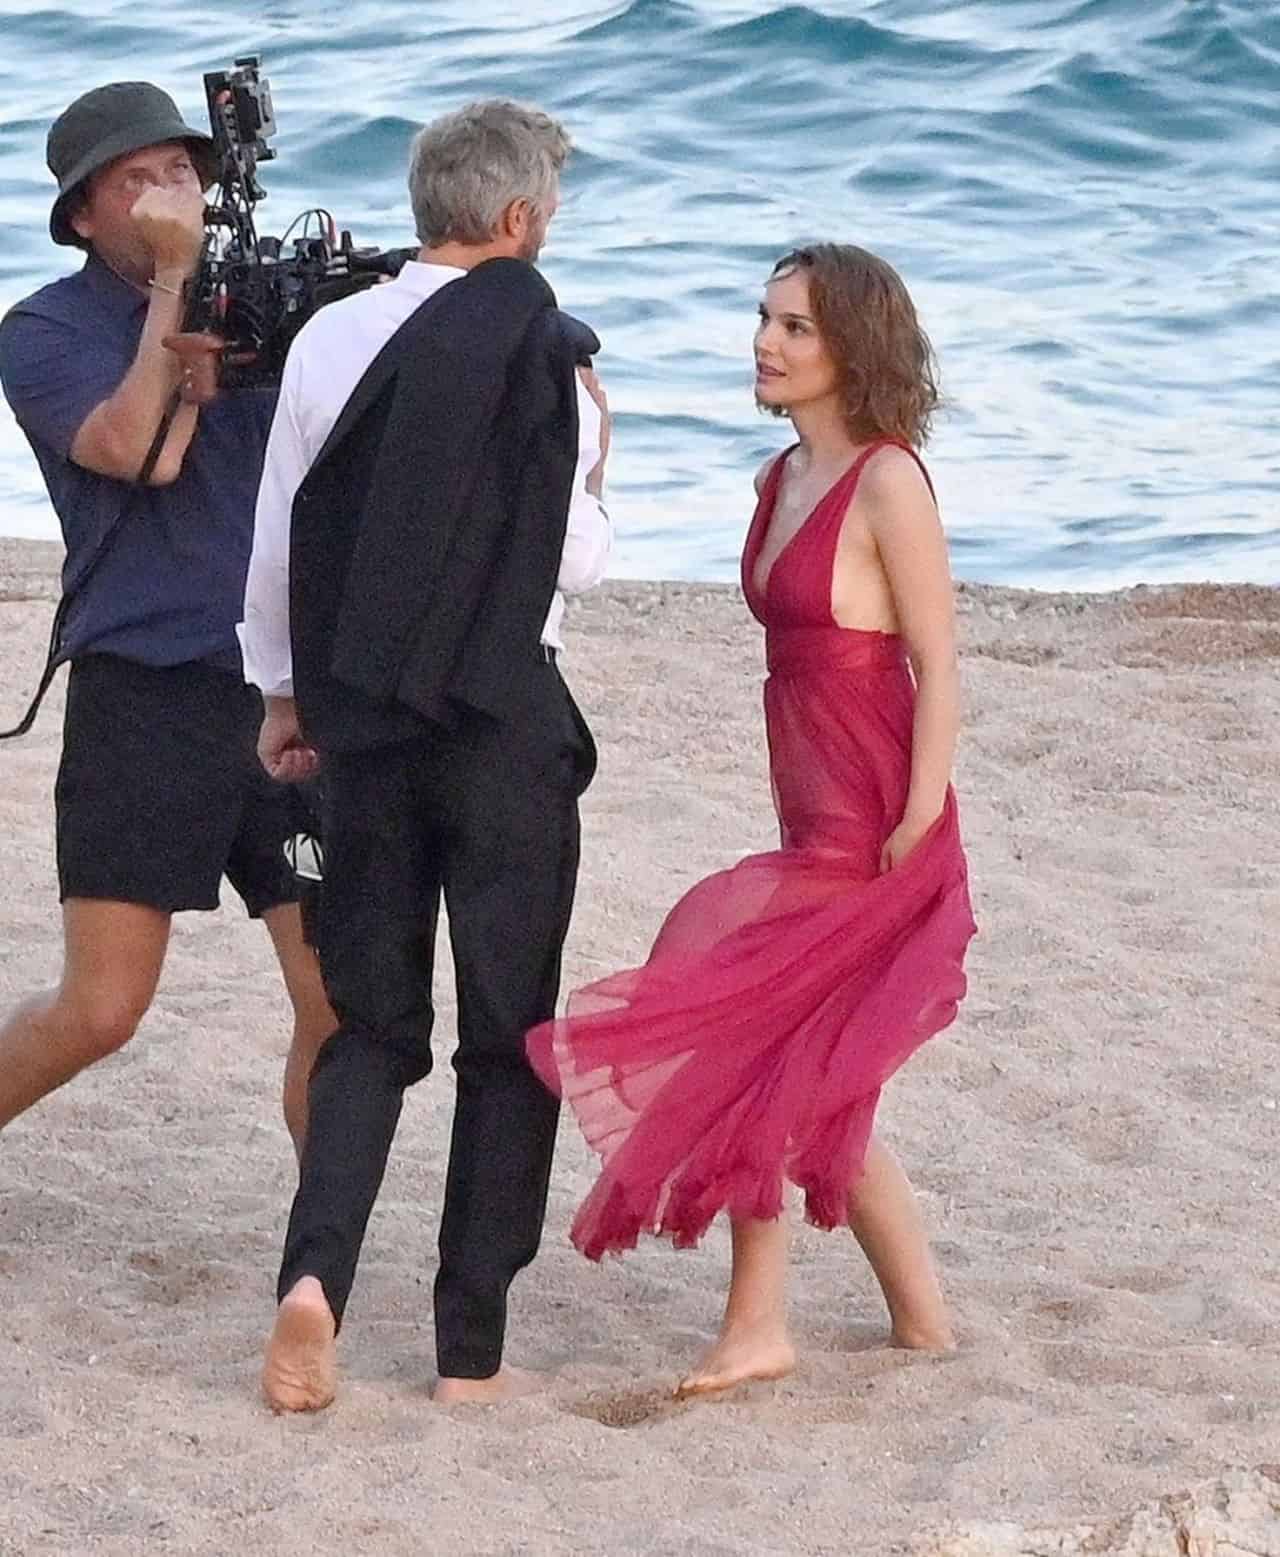 Natalie Portman Stuns in Sheer Red Dress for Dior Campaign Shoot in Spain